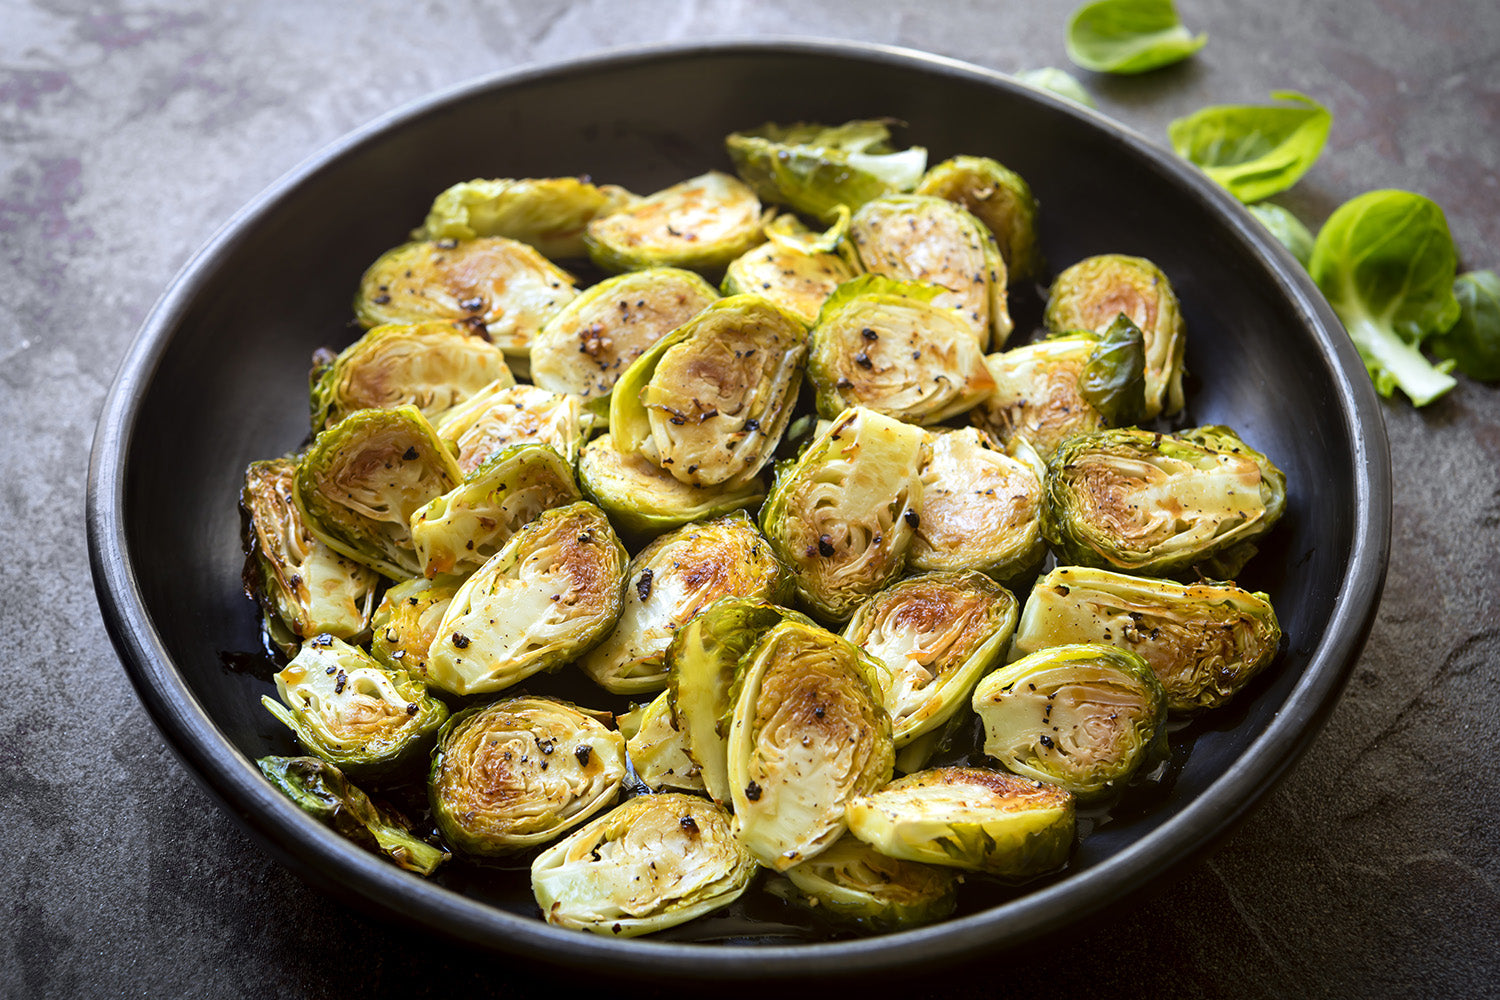 Roasted Brussels Sprouts with Garlic Balsamic